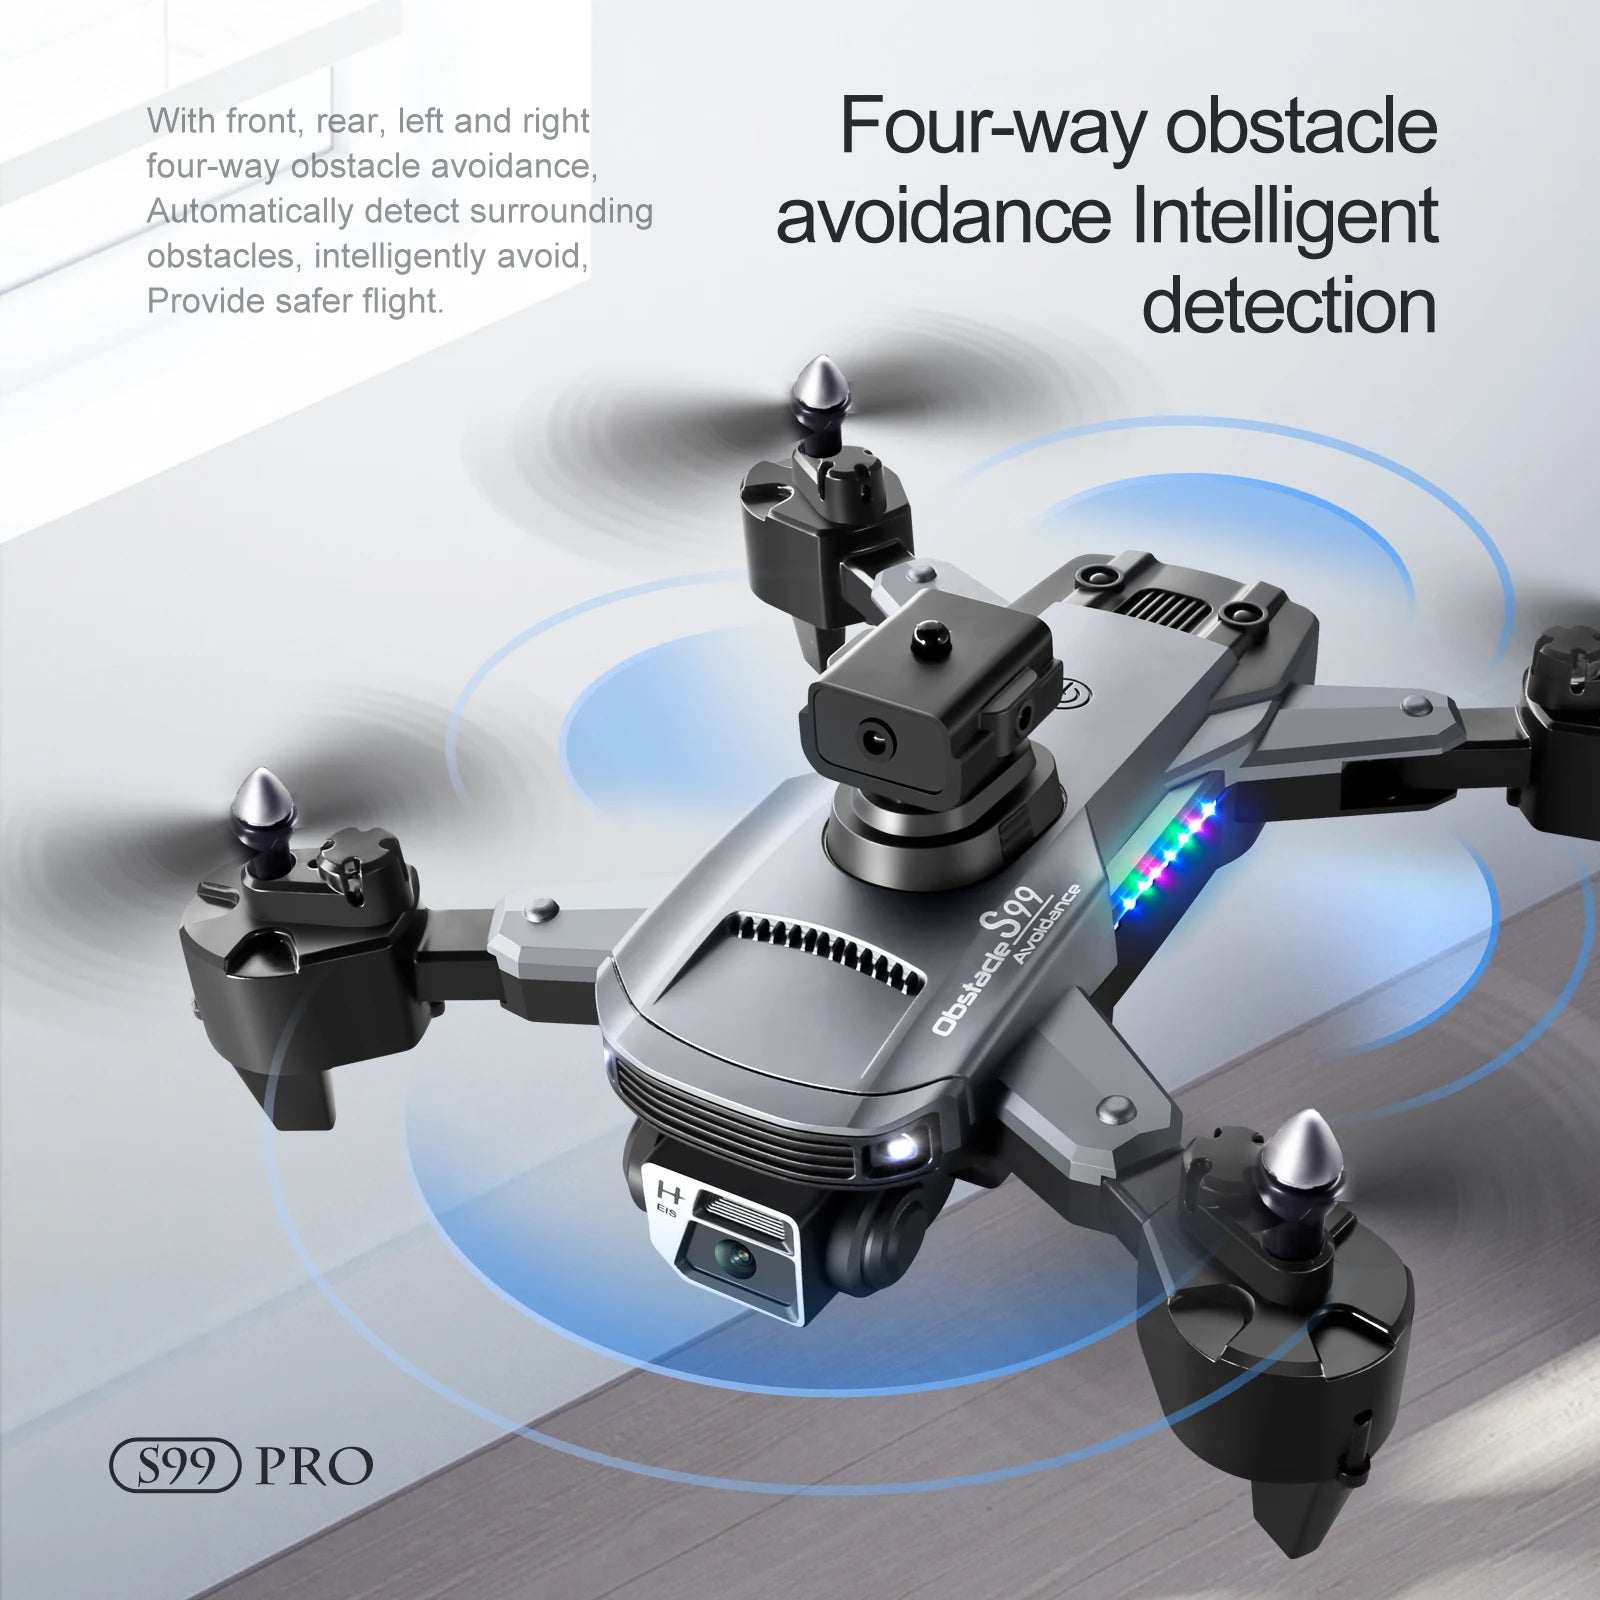 S99 Drone, with front; rear; left and right four-way obstacle avoidance